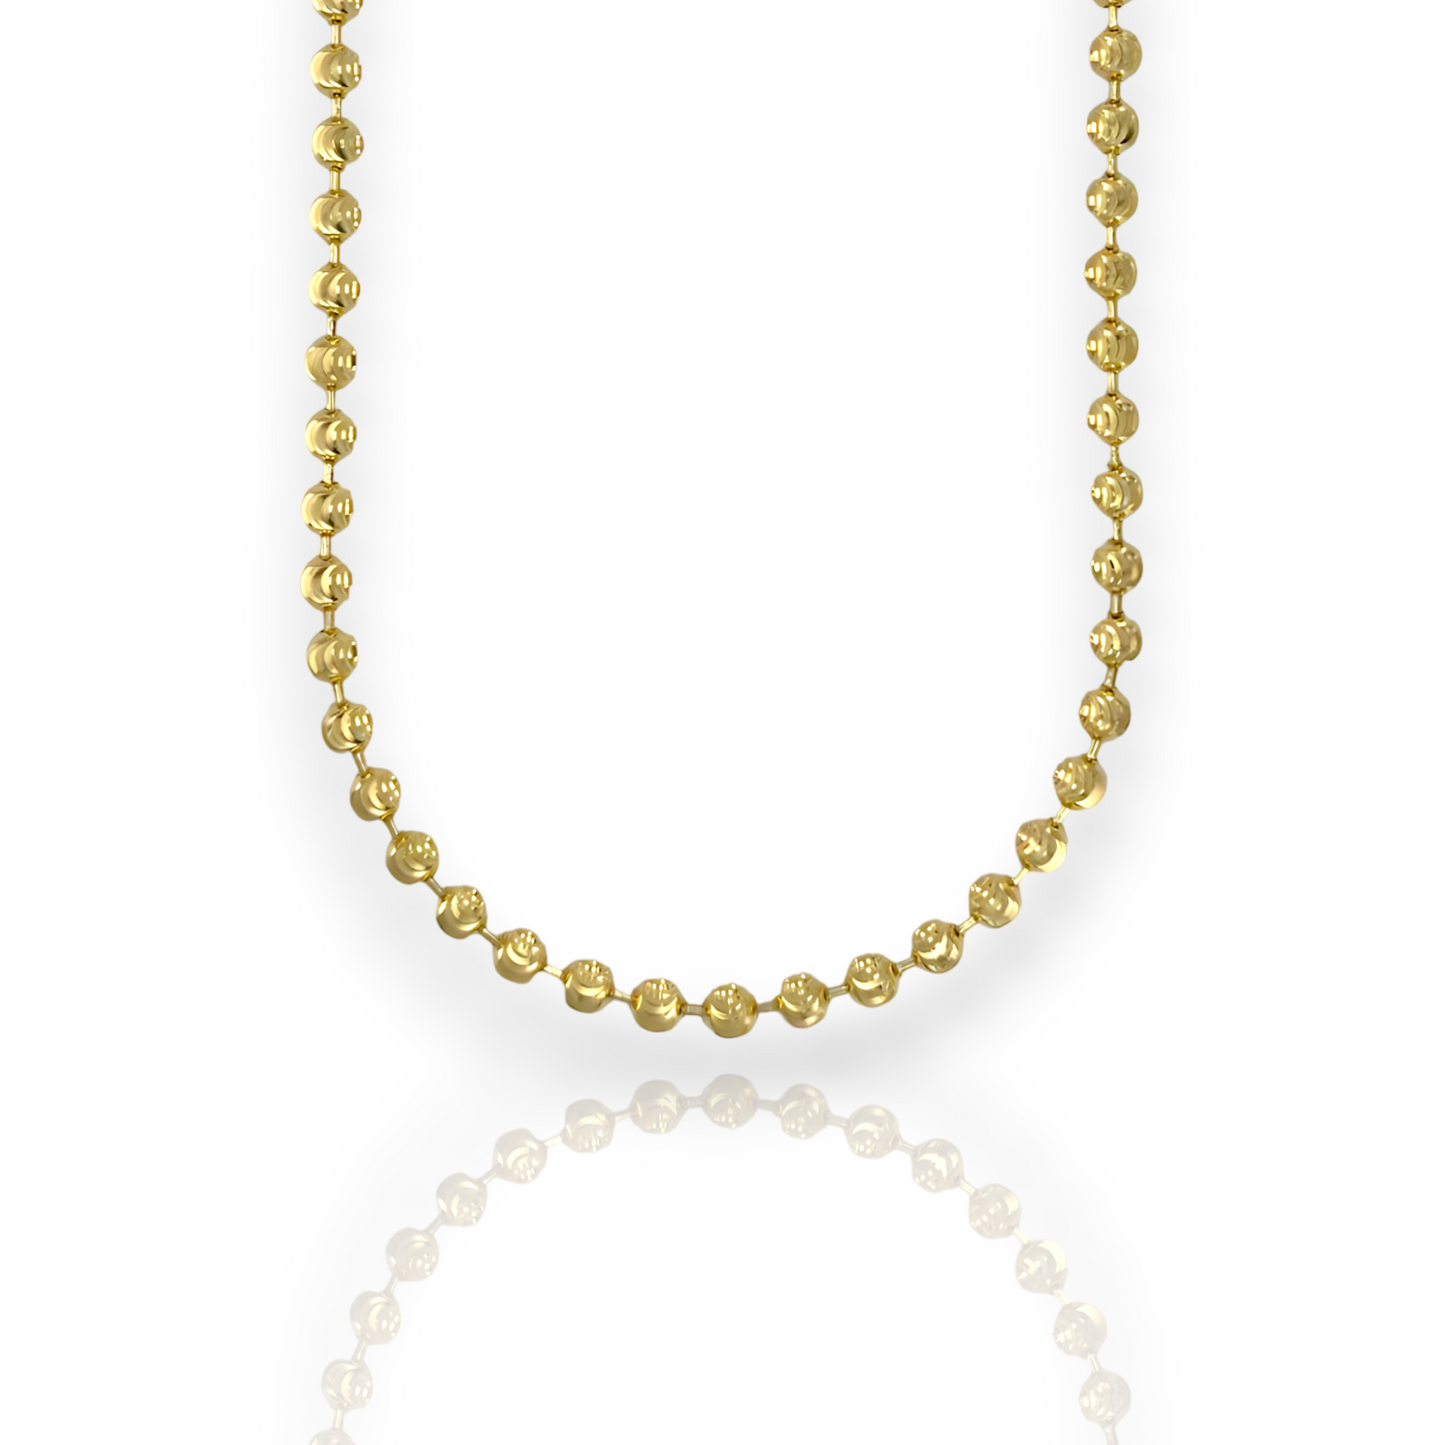 Bead Ball Moon Cut Link Chain Necklace - 10K Yellow Gold - Solid